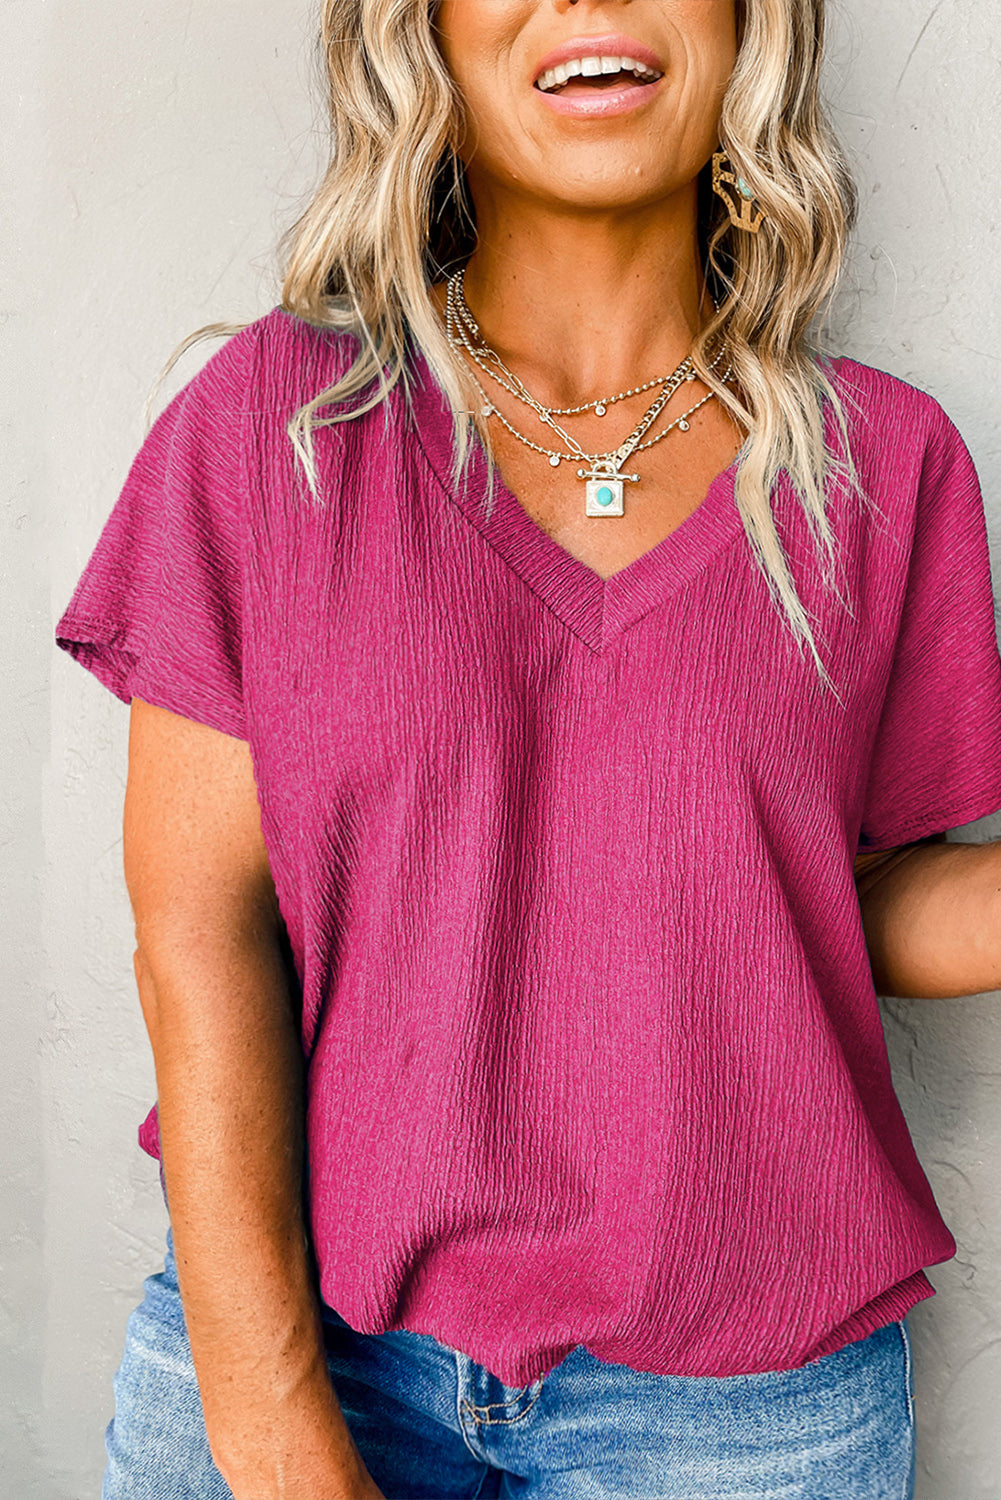 Textured V Neck Bubble Hem Top Only in Curvy Sizes